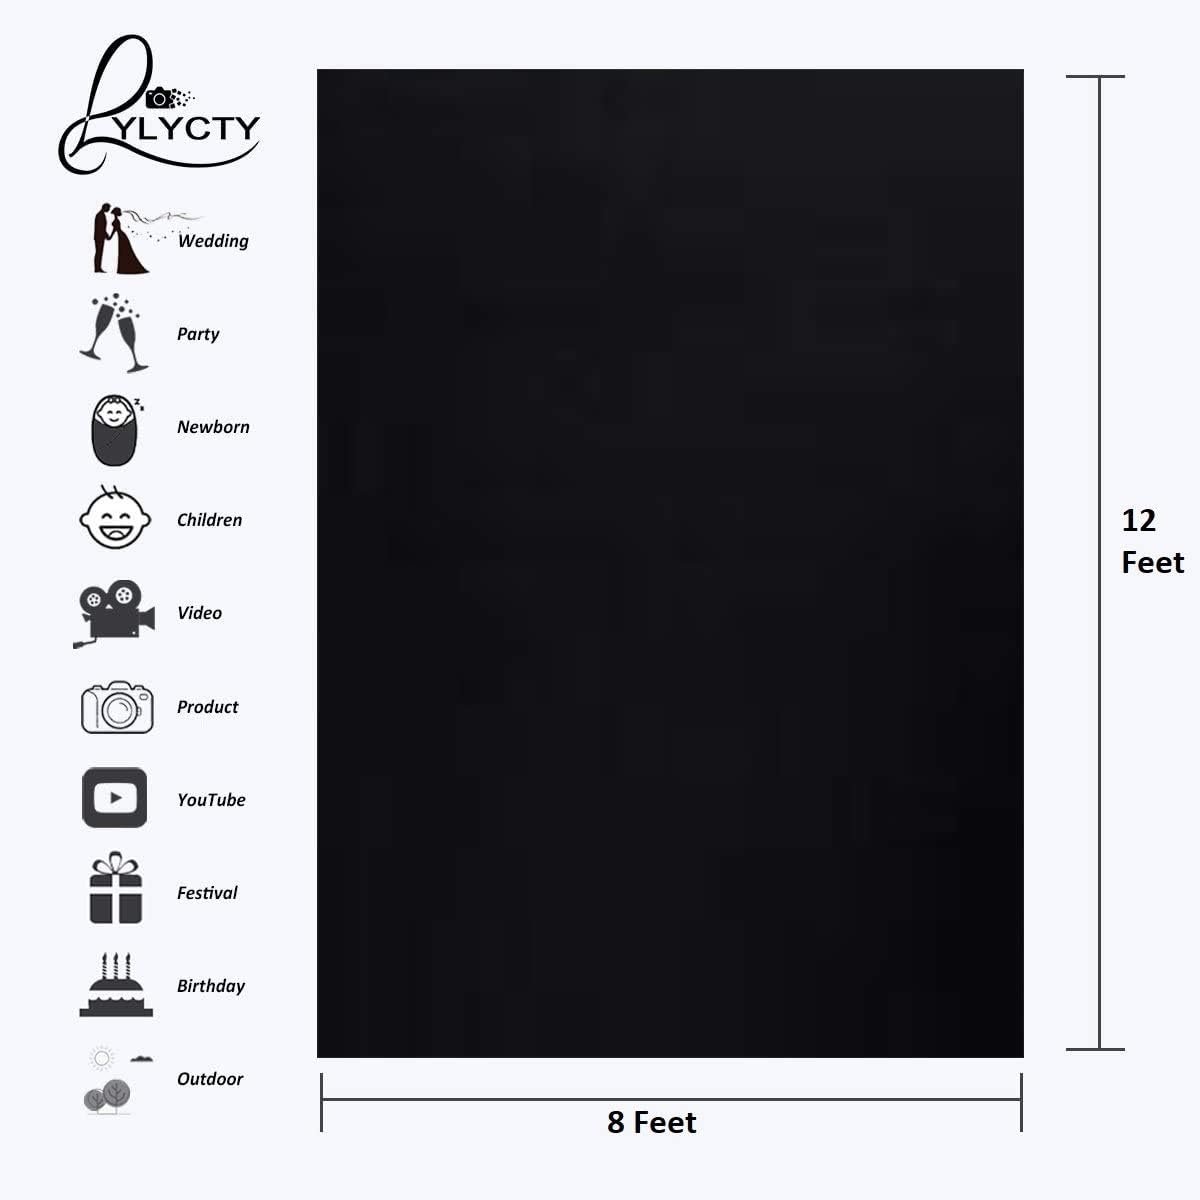 EYUVAA Polyester Wrinkle Resistant Photography Background Cloth for Photoshoot Portrait Video Shooting (8x12 ft) (Black)